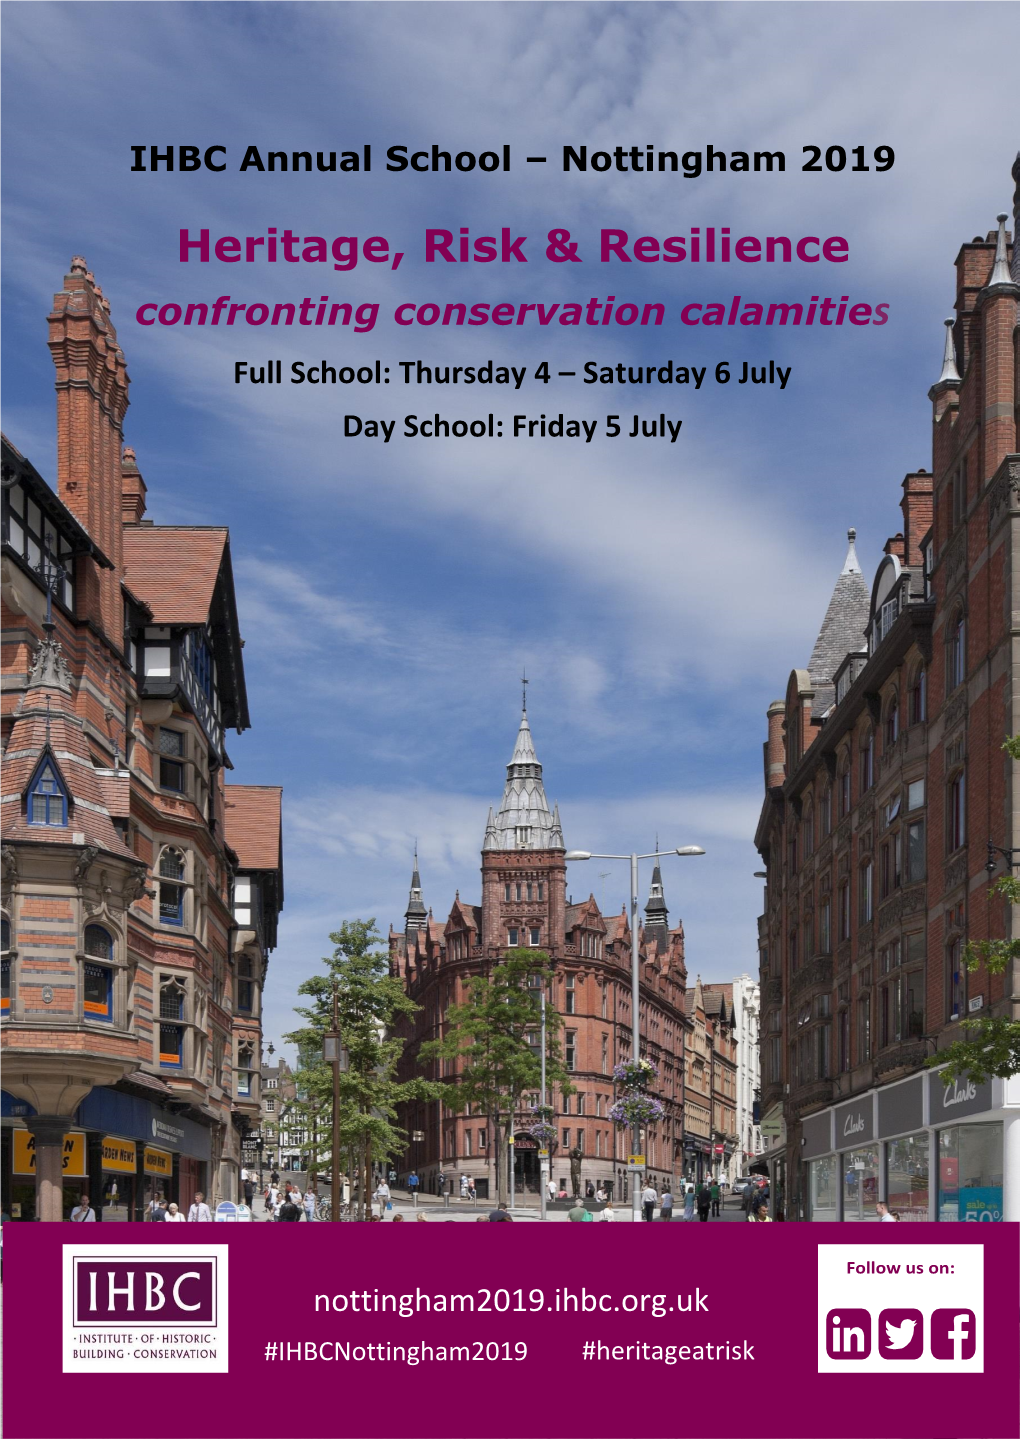 Heritage, Risk & Resilience